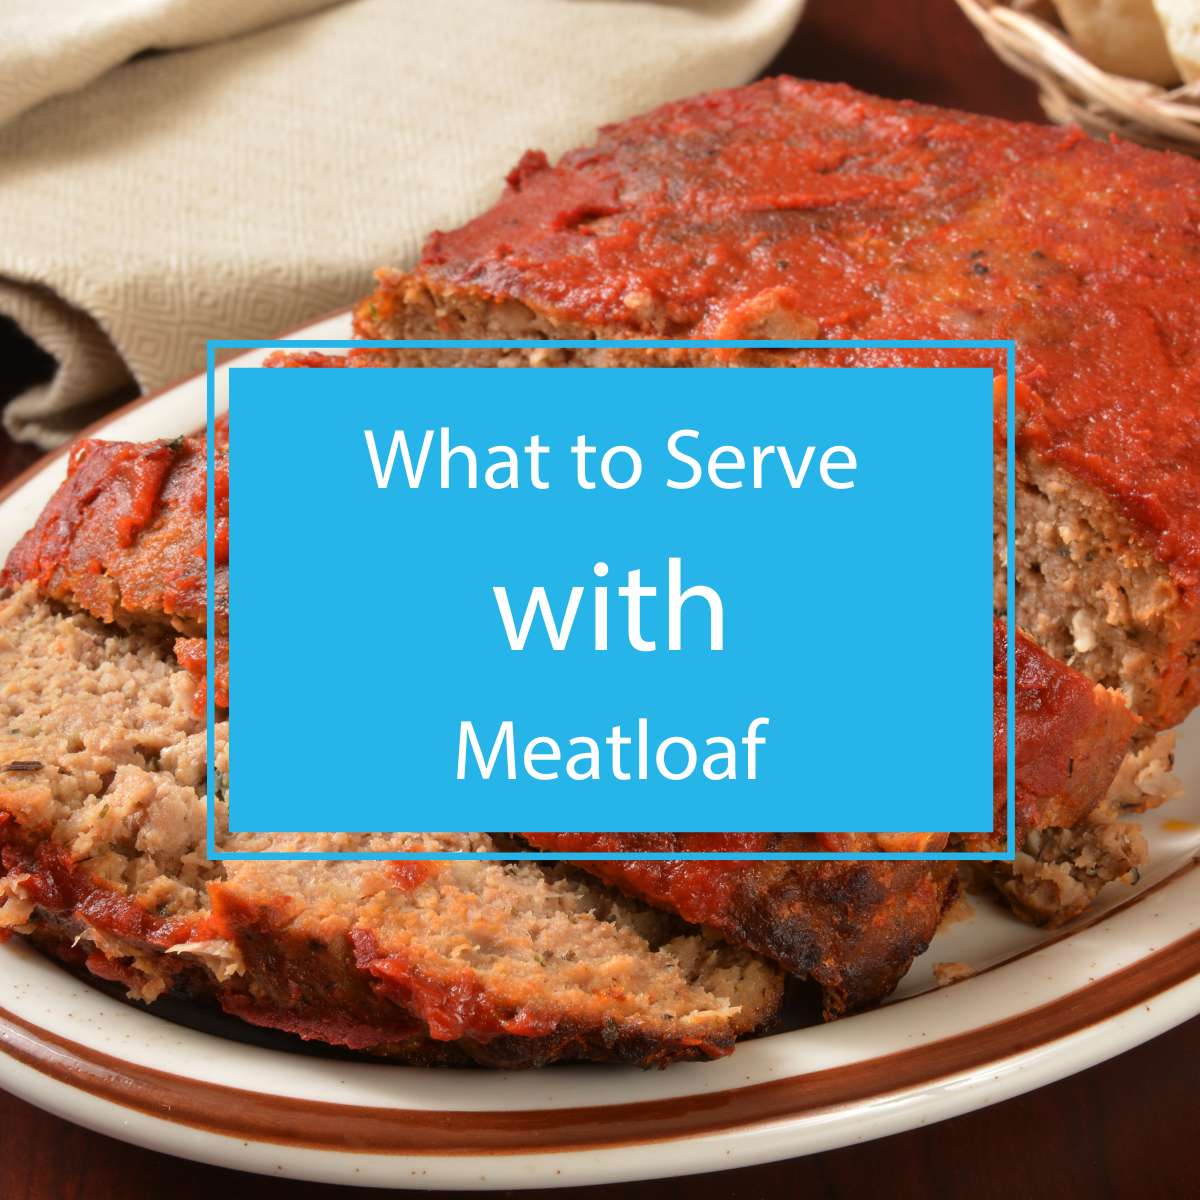 What to Serve with Meatloaf